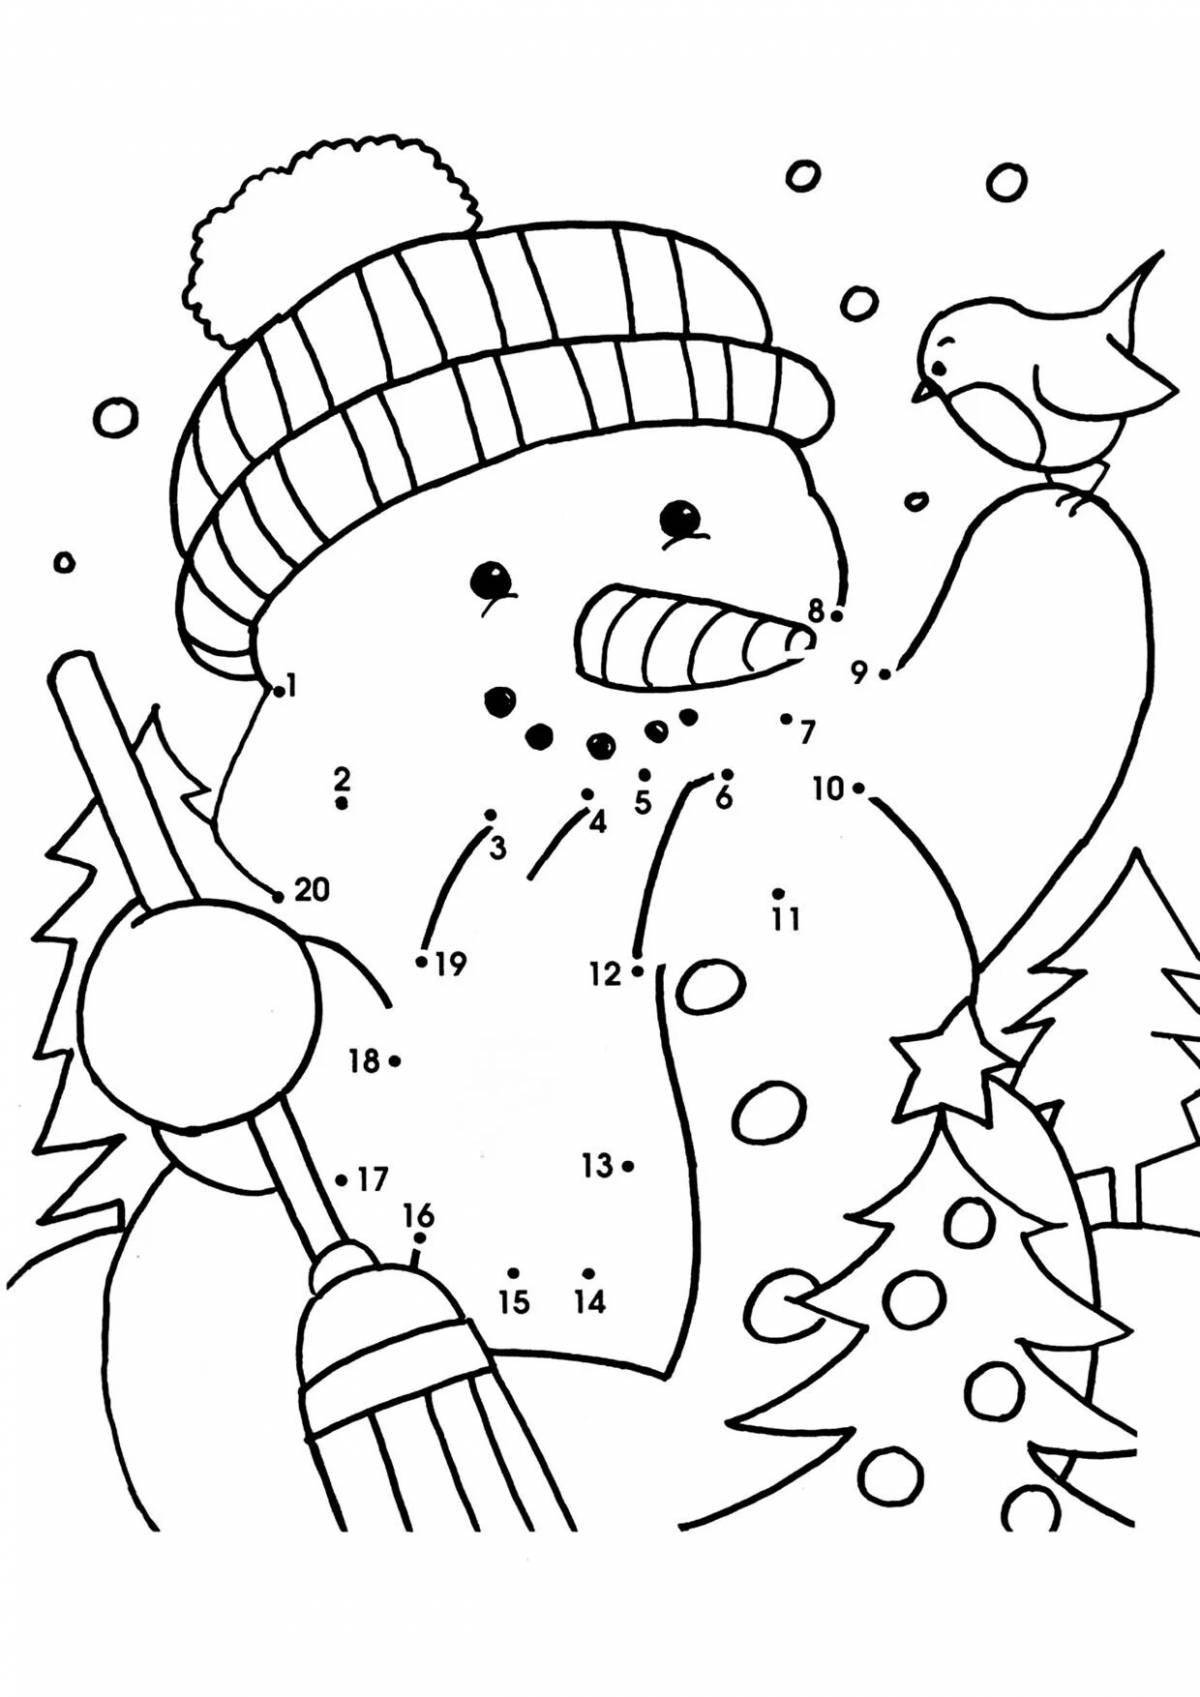 Funny christmas coloring by number for kids